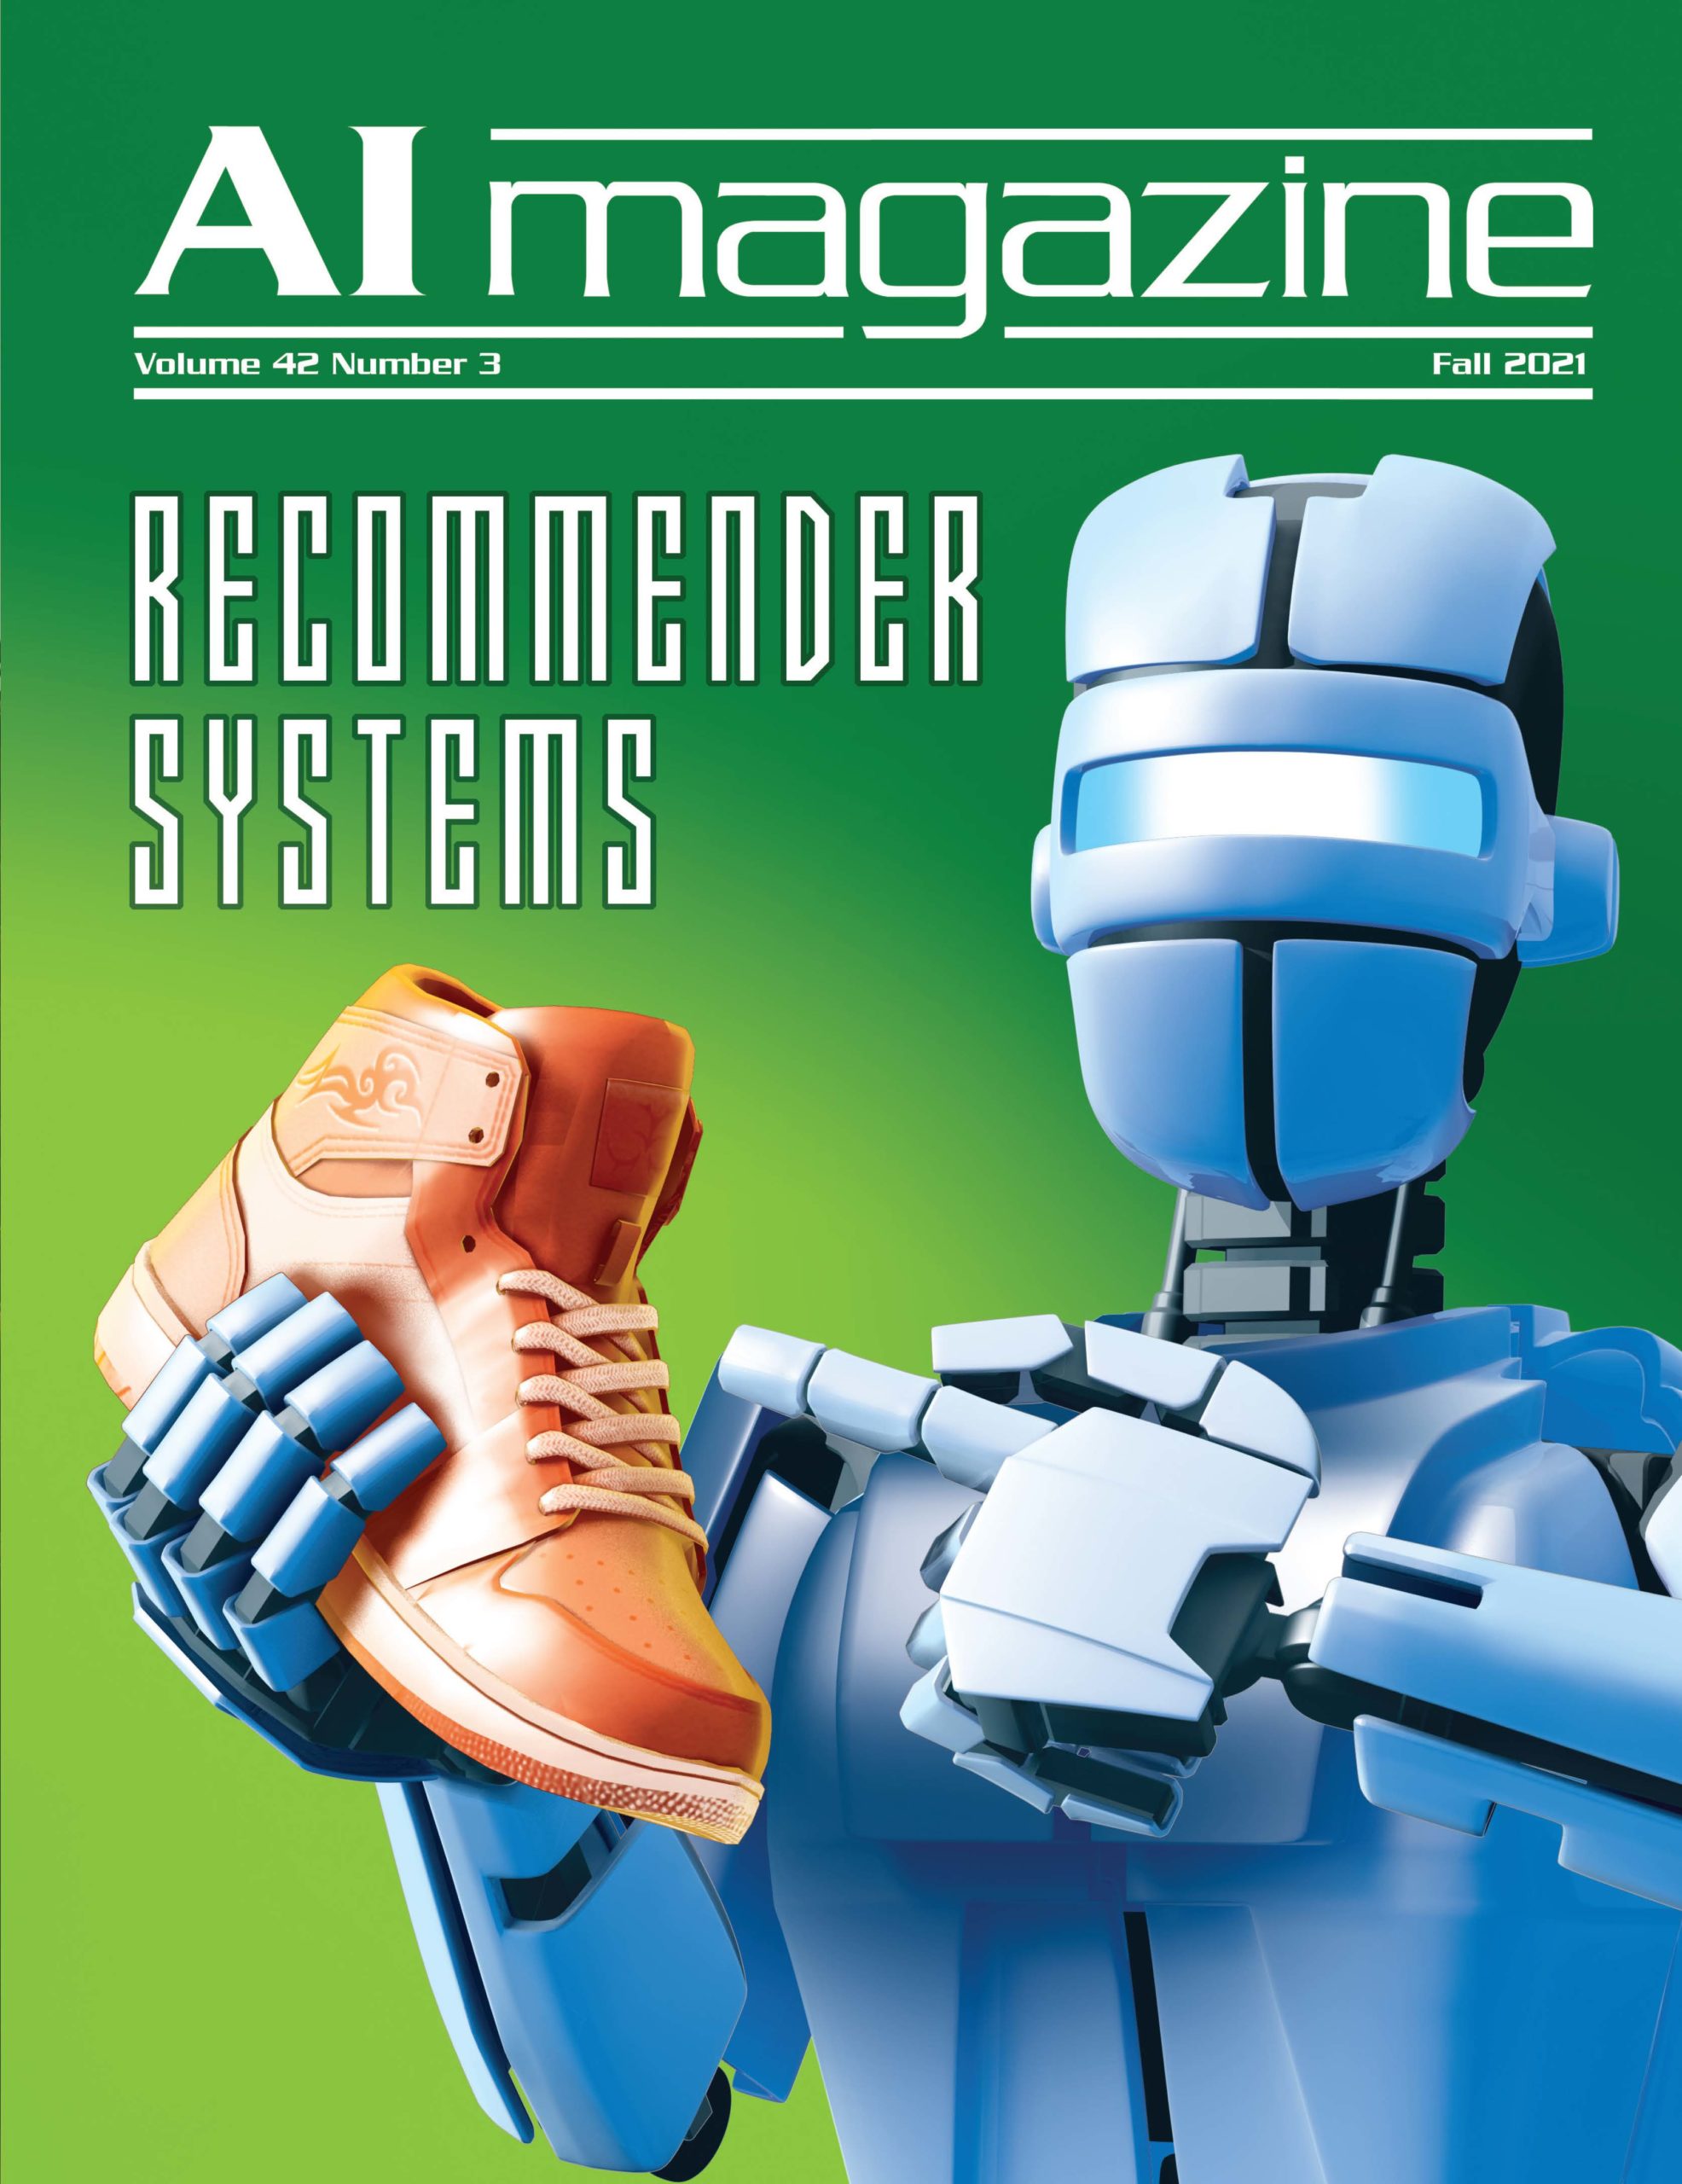 Fall 2021: Recommender Systems